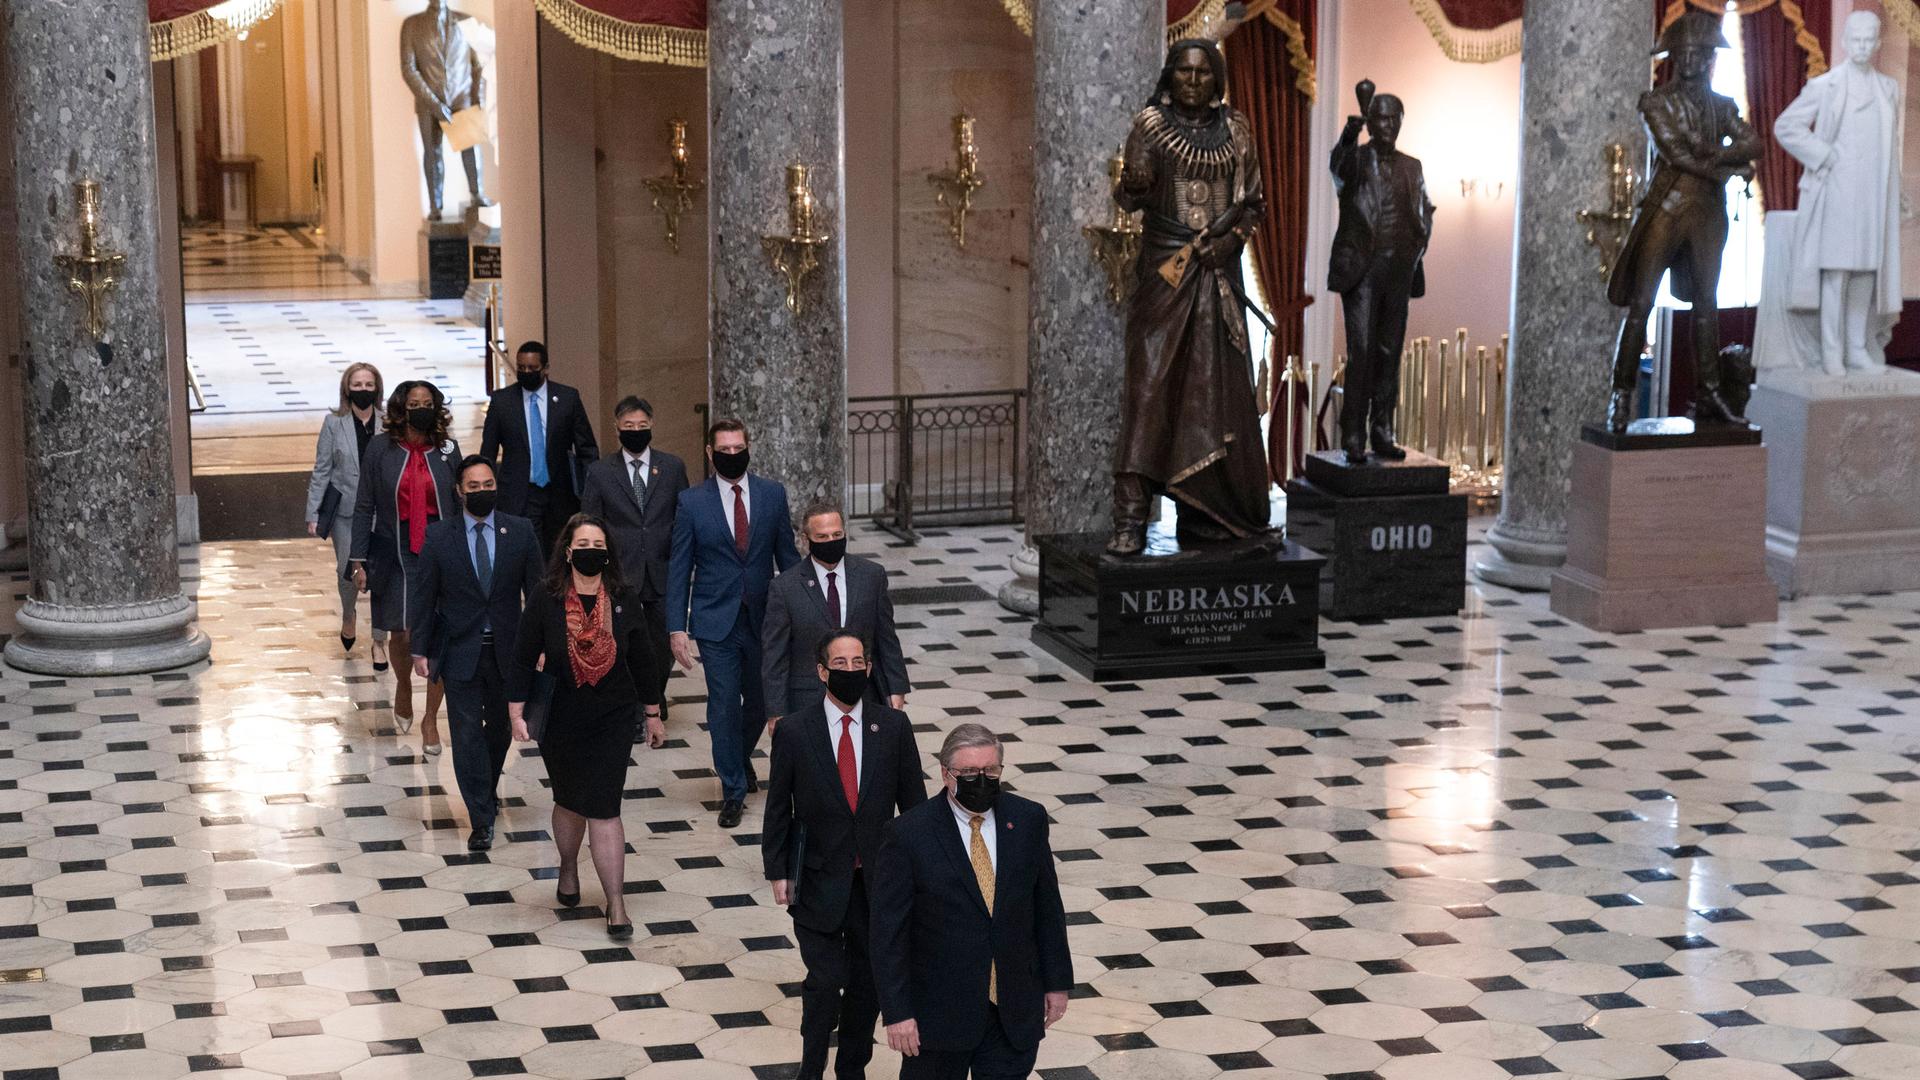 Two liines of lawmakers are shown walking across a black and white checkered floor in a large room with tall marble pillars.